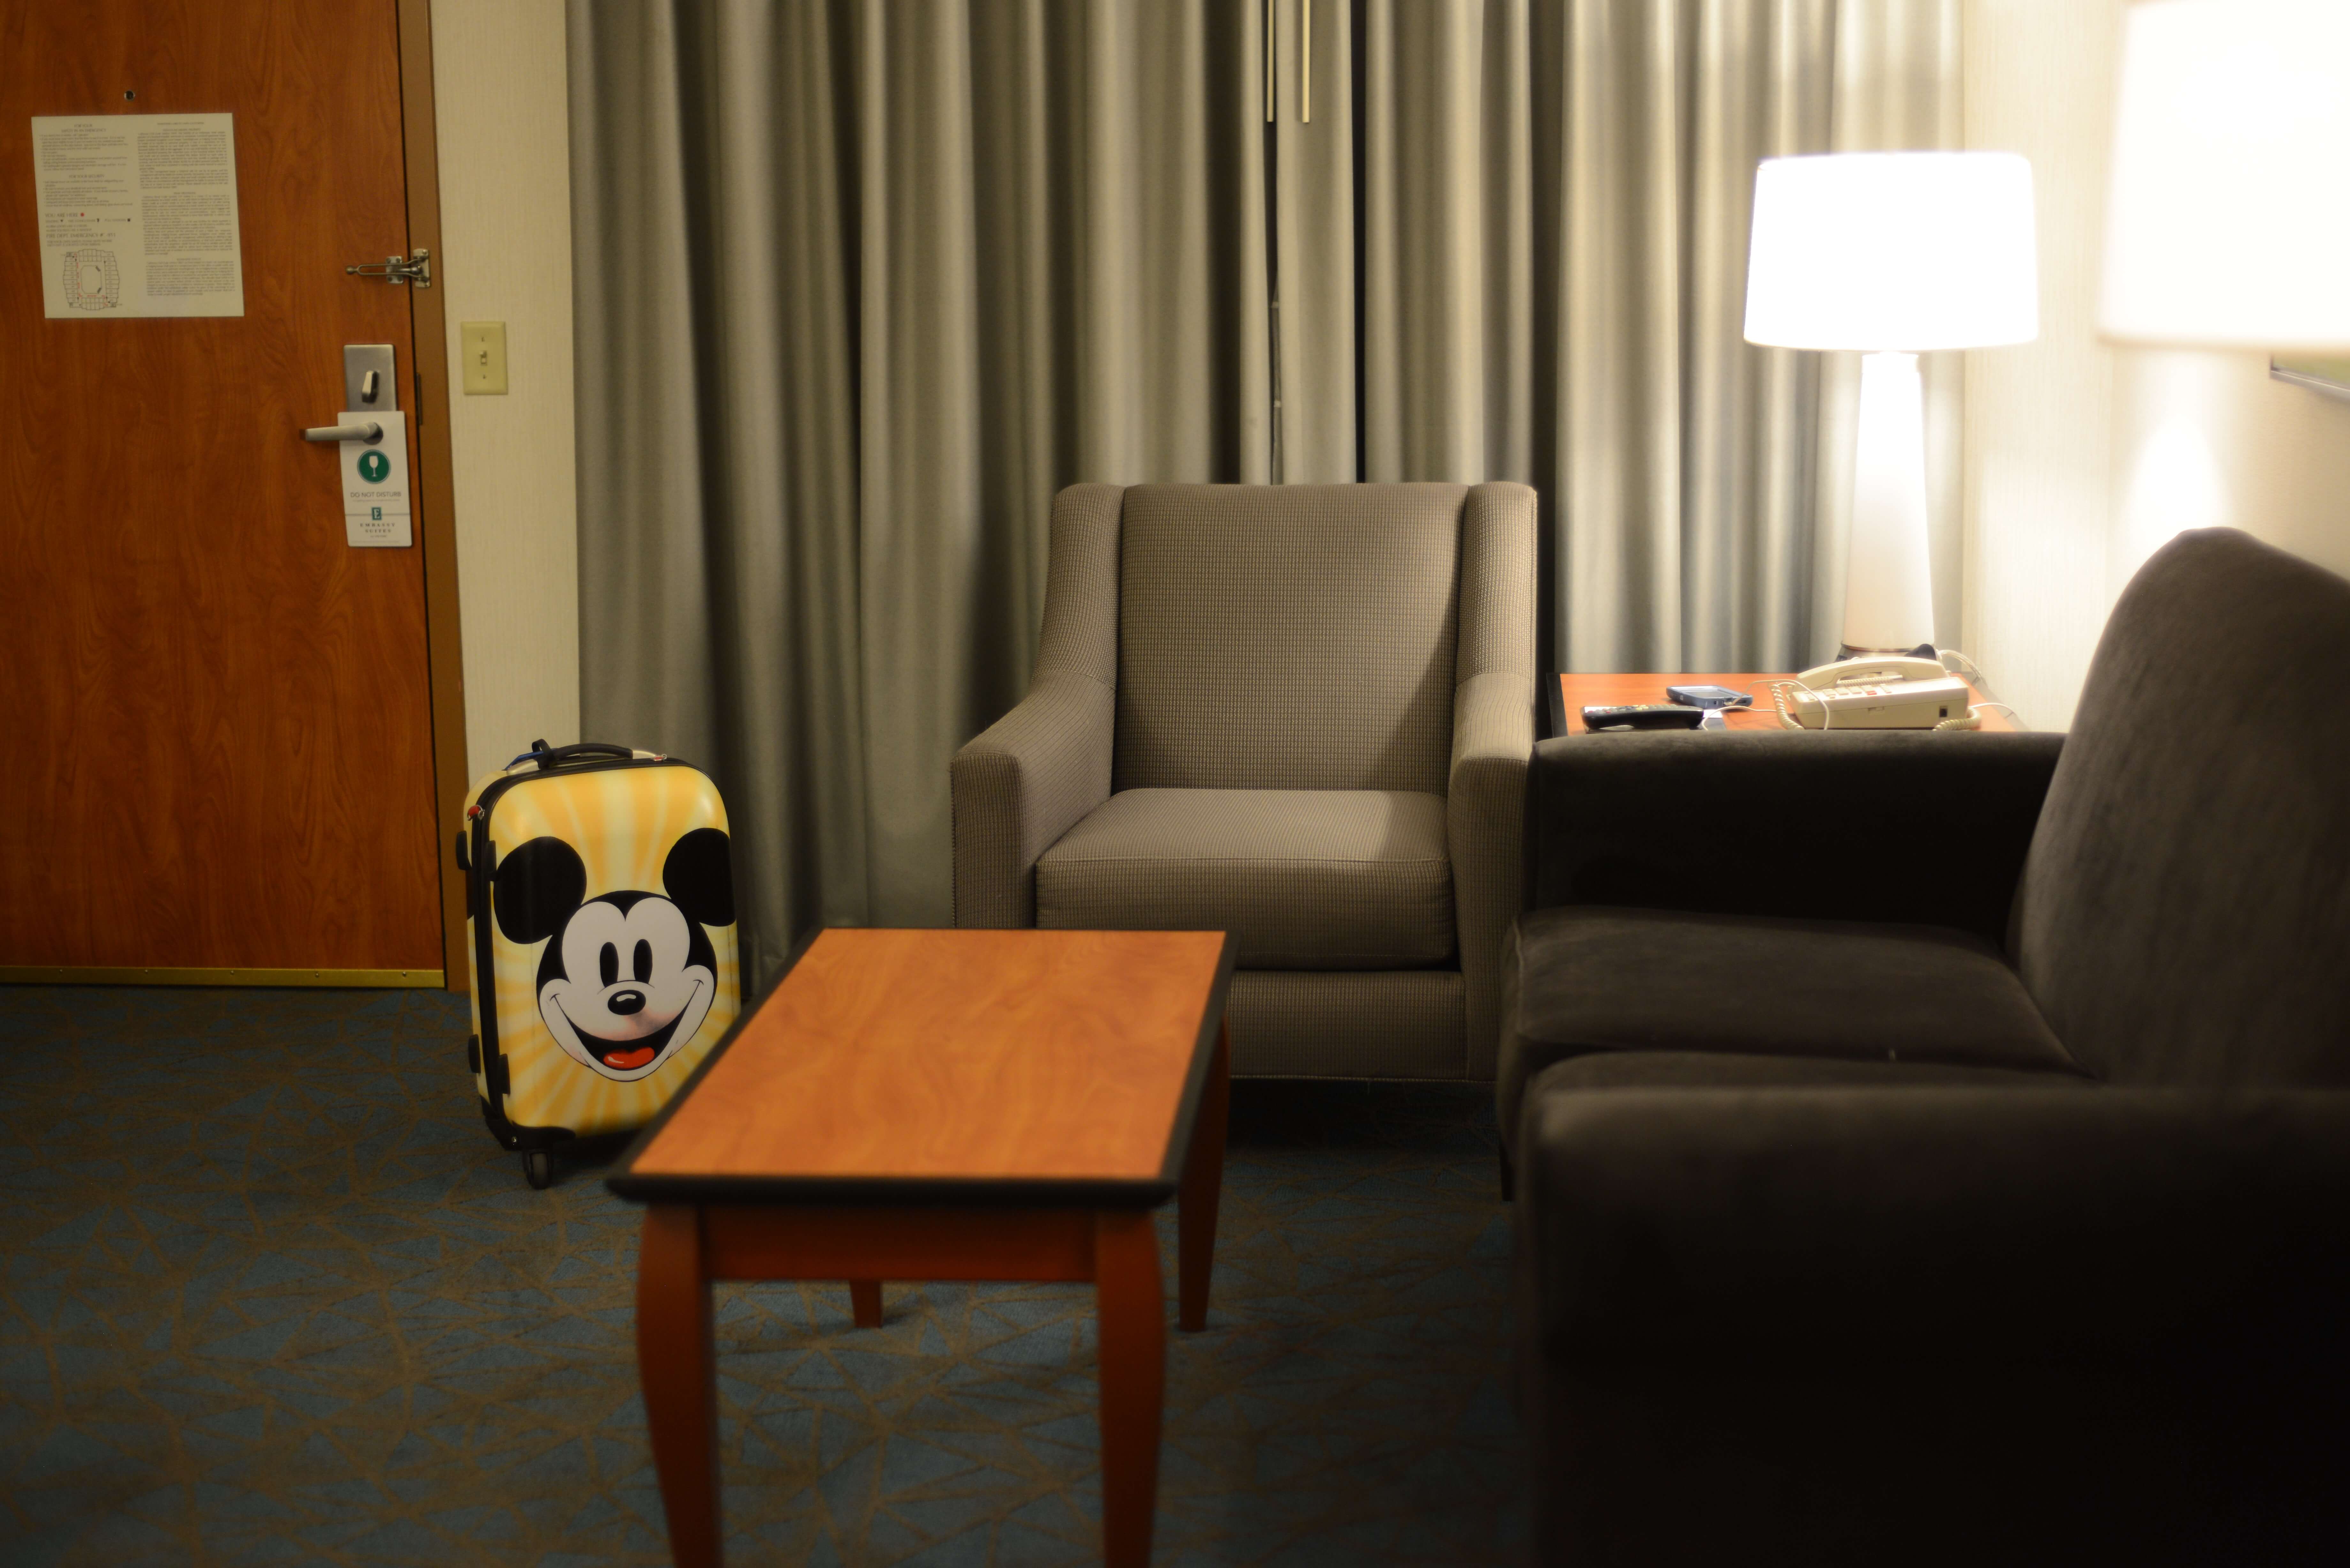 Embassy Suites Anaheim North suite room and a short distance from Disneyland